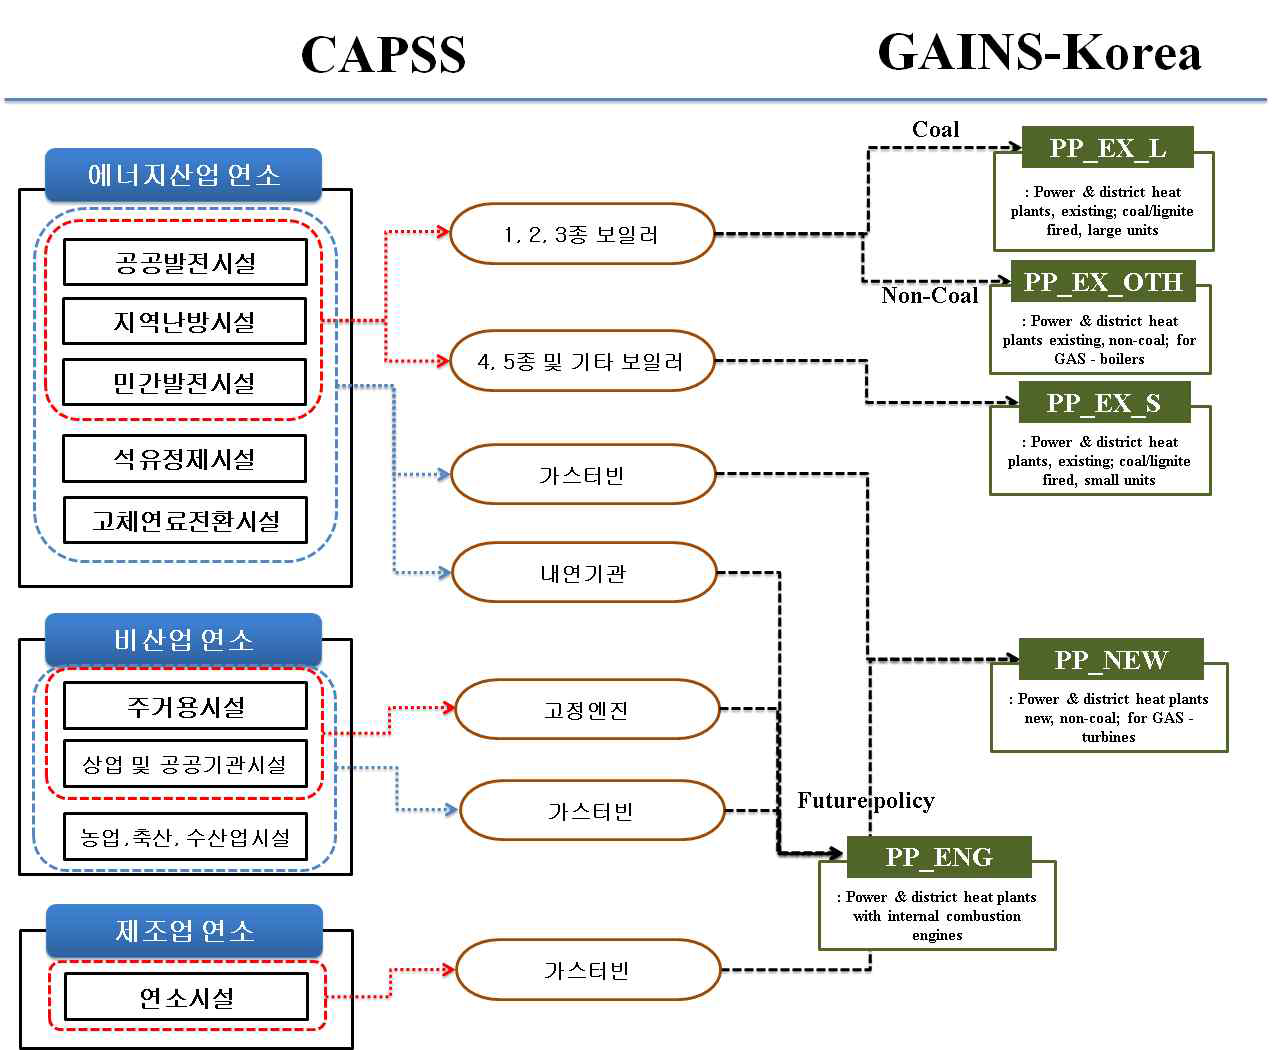 Flowchart of mapping process for Powerplant sector between CAPSS and GAINS-Korea